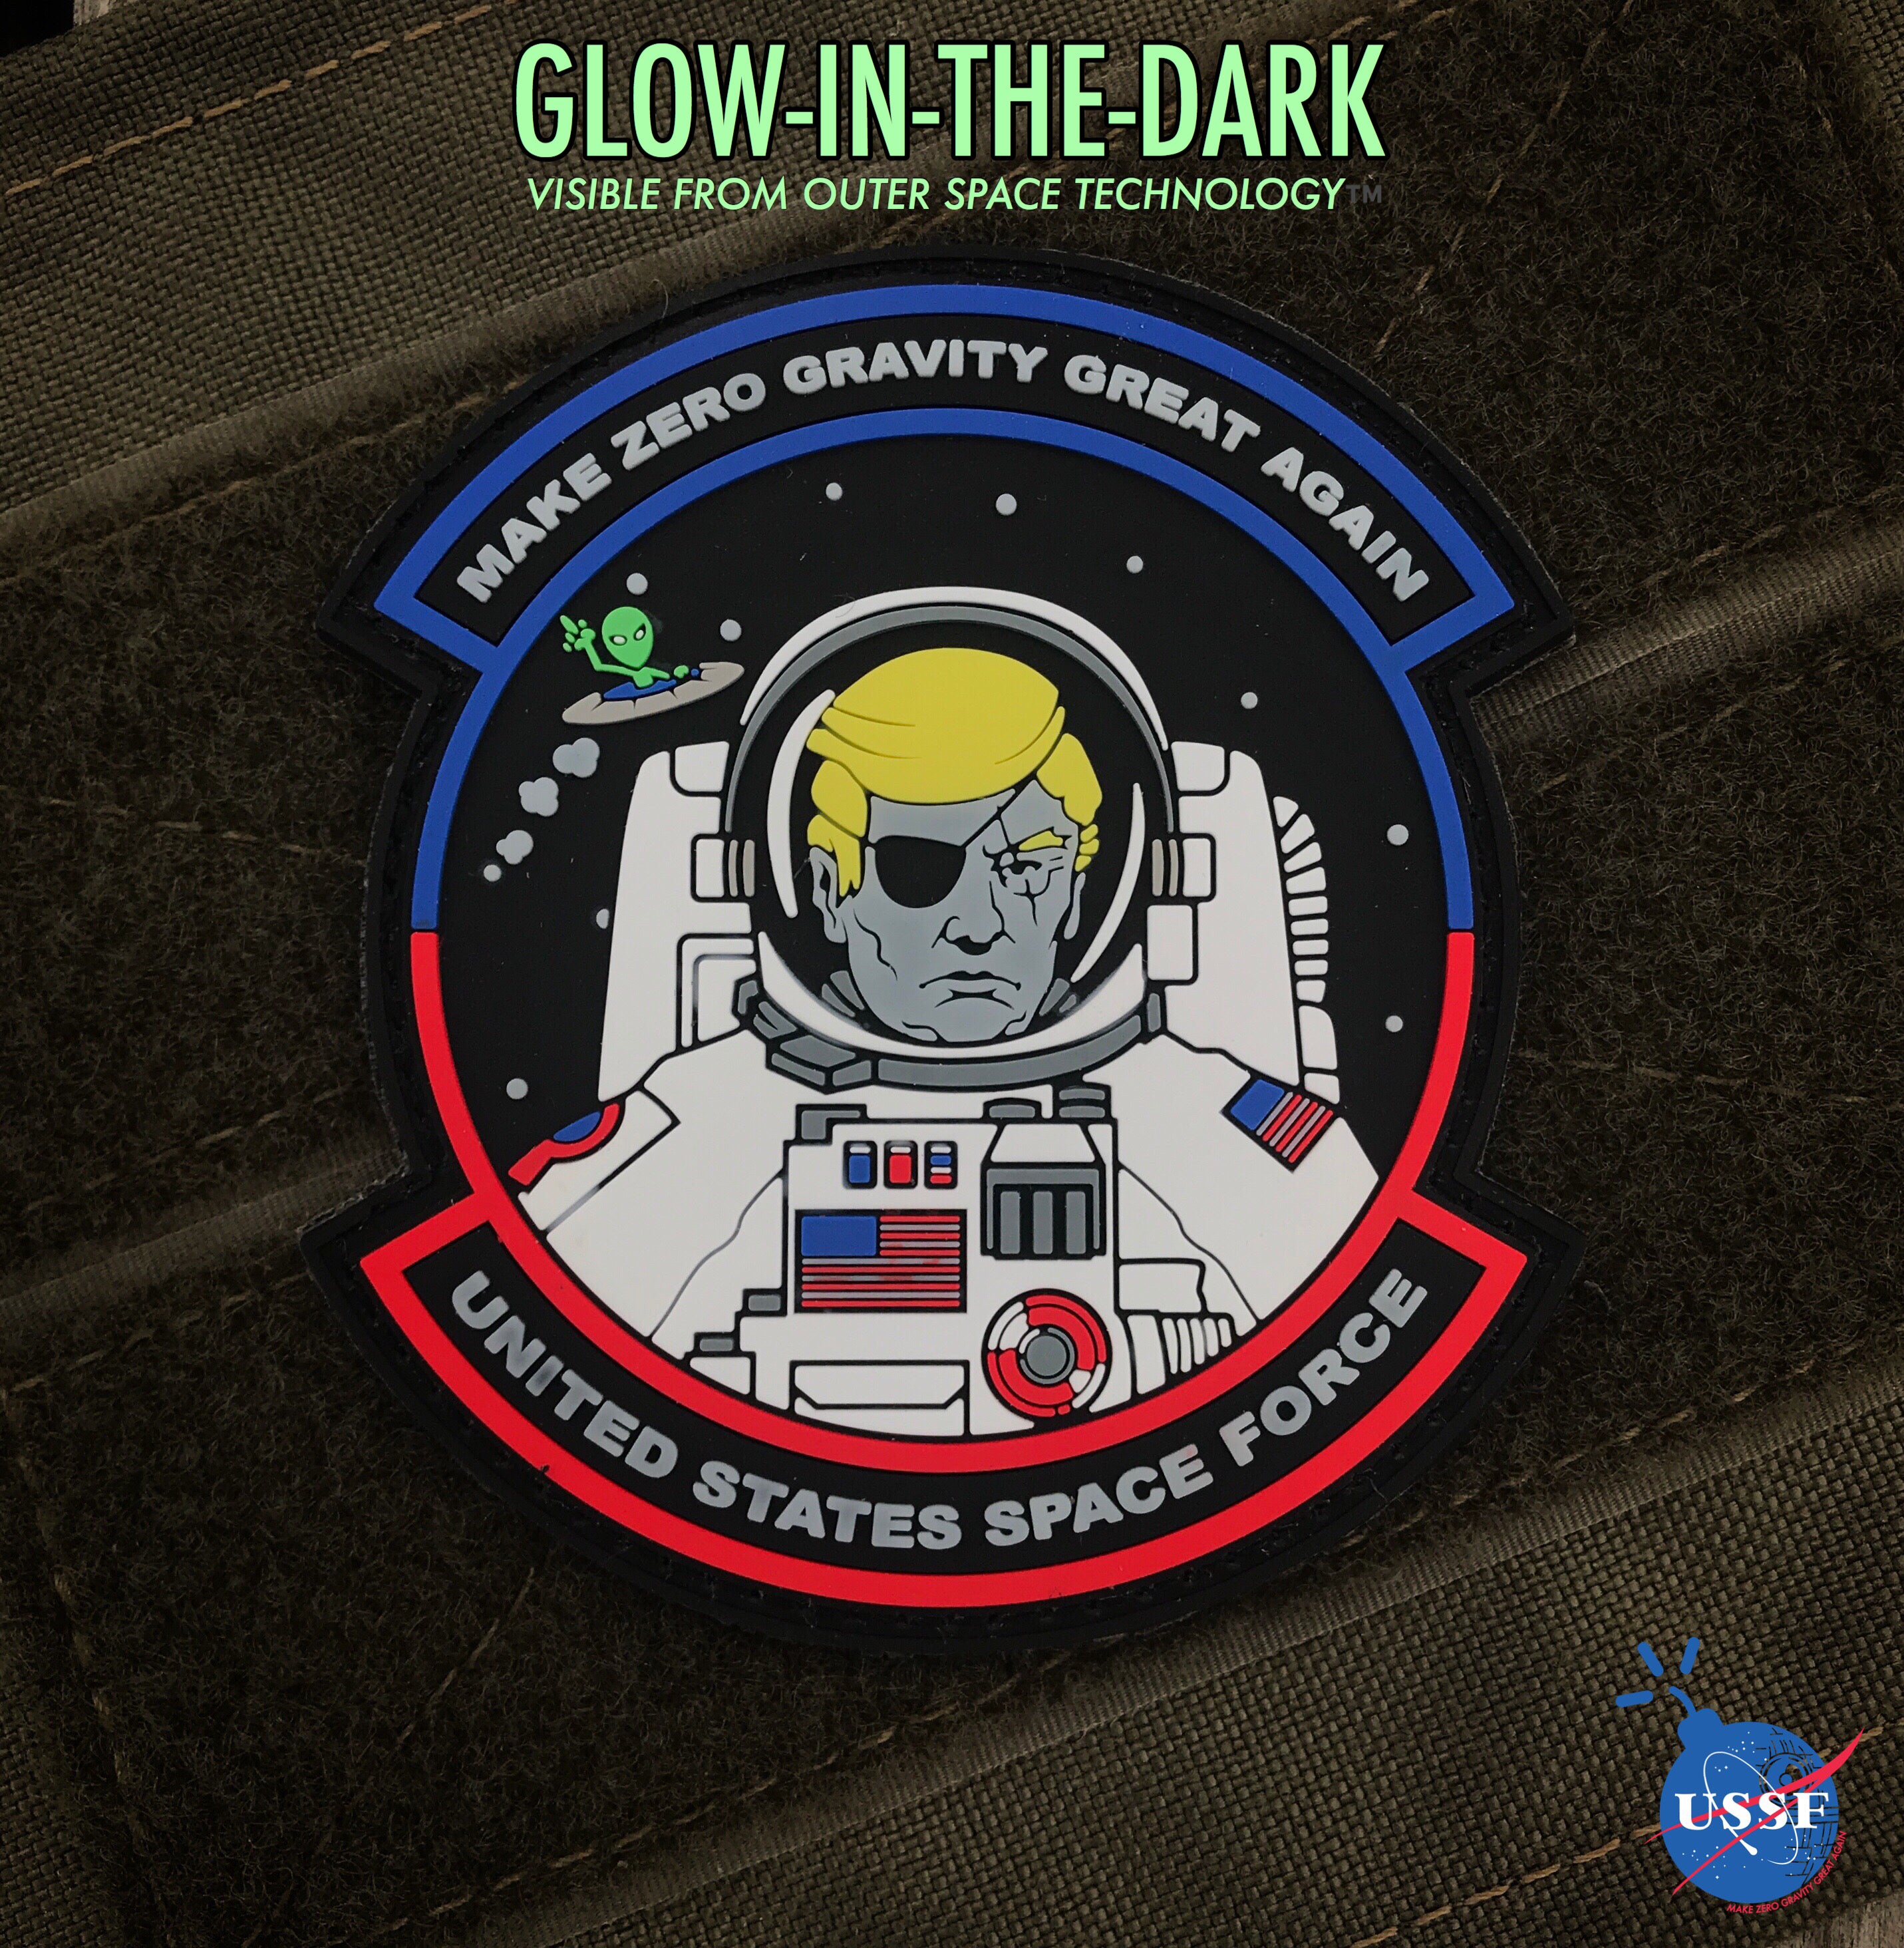 Dangerous Goods® Donald Trump USSF Space Force 3D PVC Morale Patch - Glow In The Dark